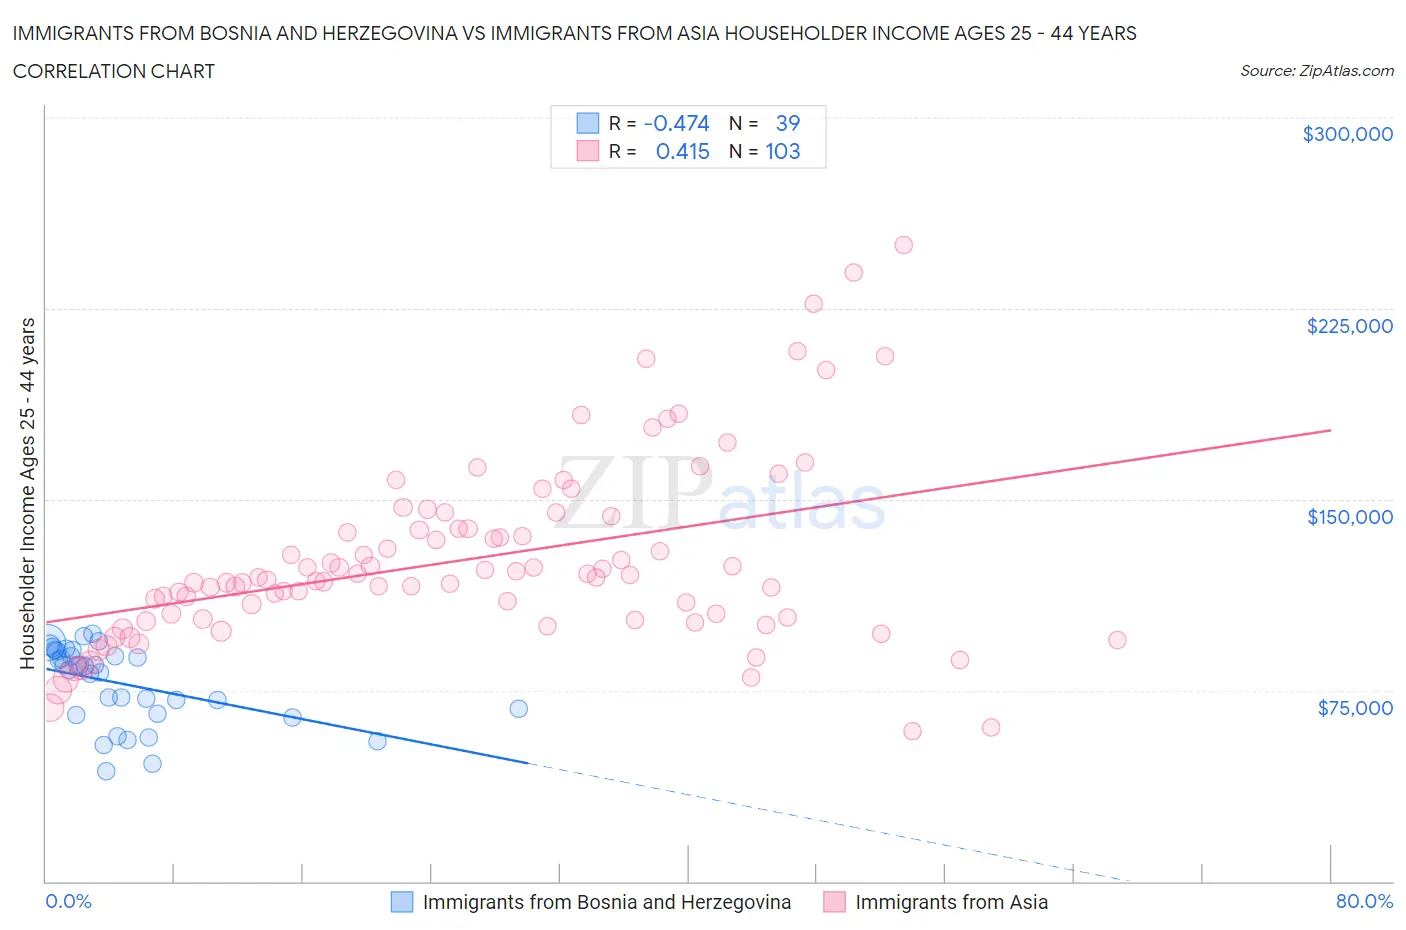 Immigrants from Bosnia and Herzegovina vs Immigrants from Asia Householder Income Ages 25 - 44 years